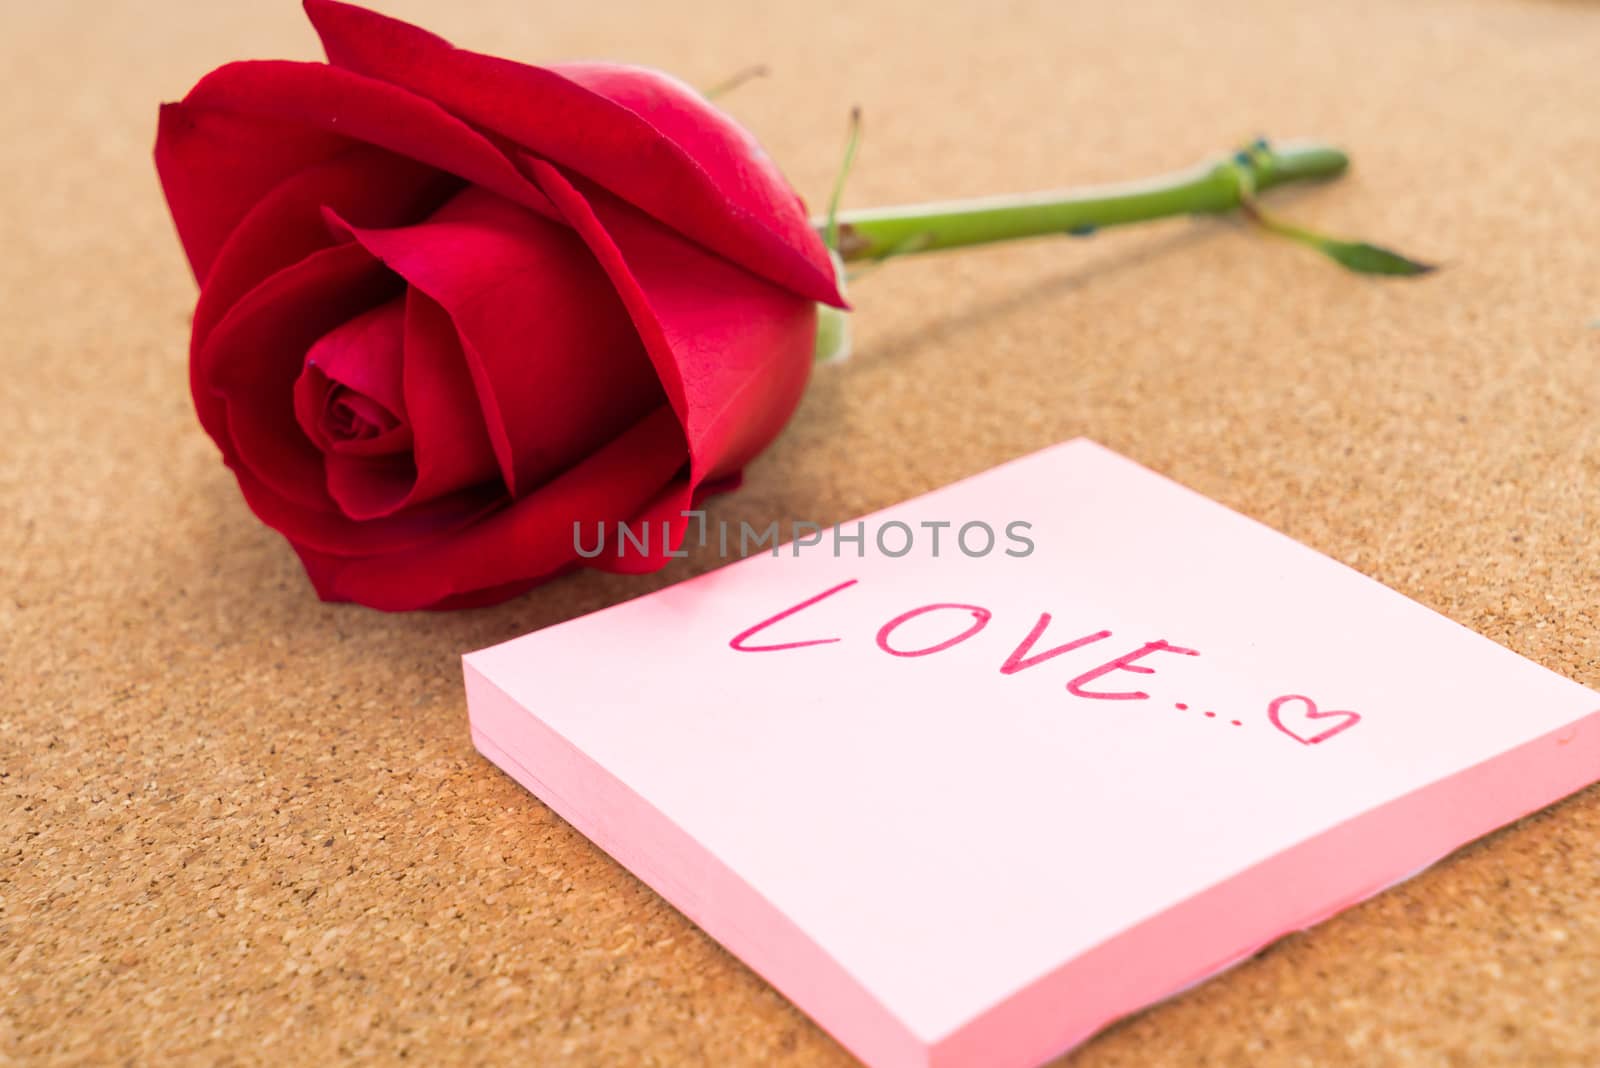 Single red rose with post it with word "love" writing on , corkboard background